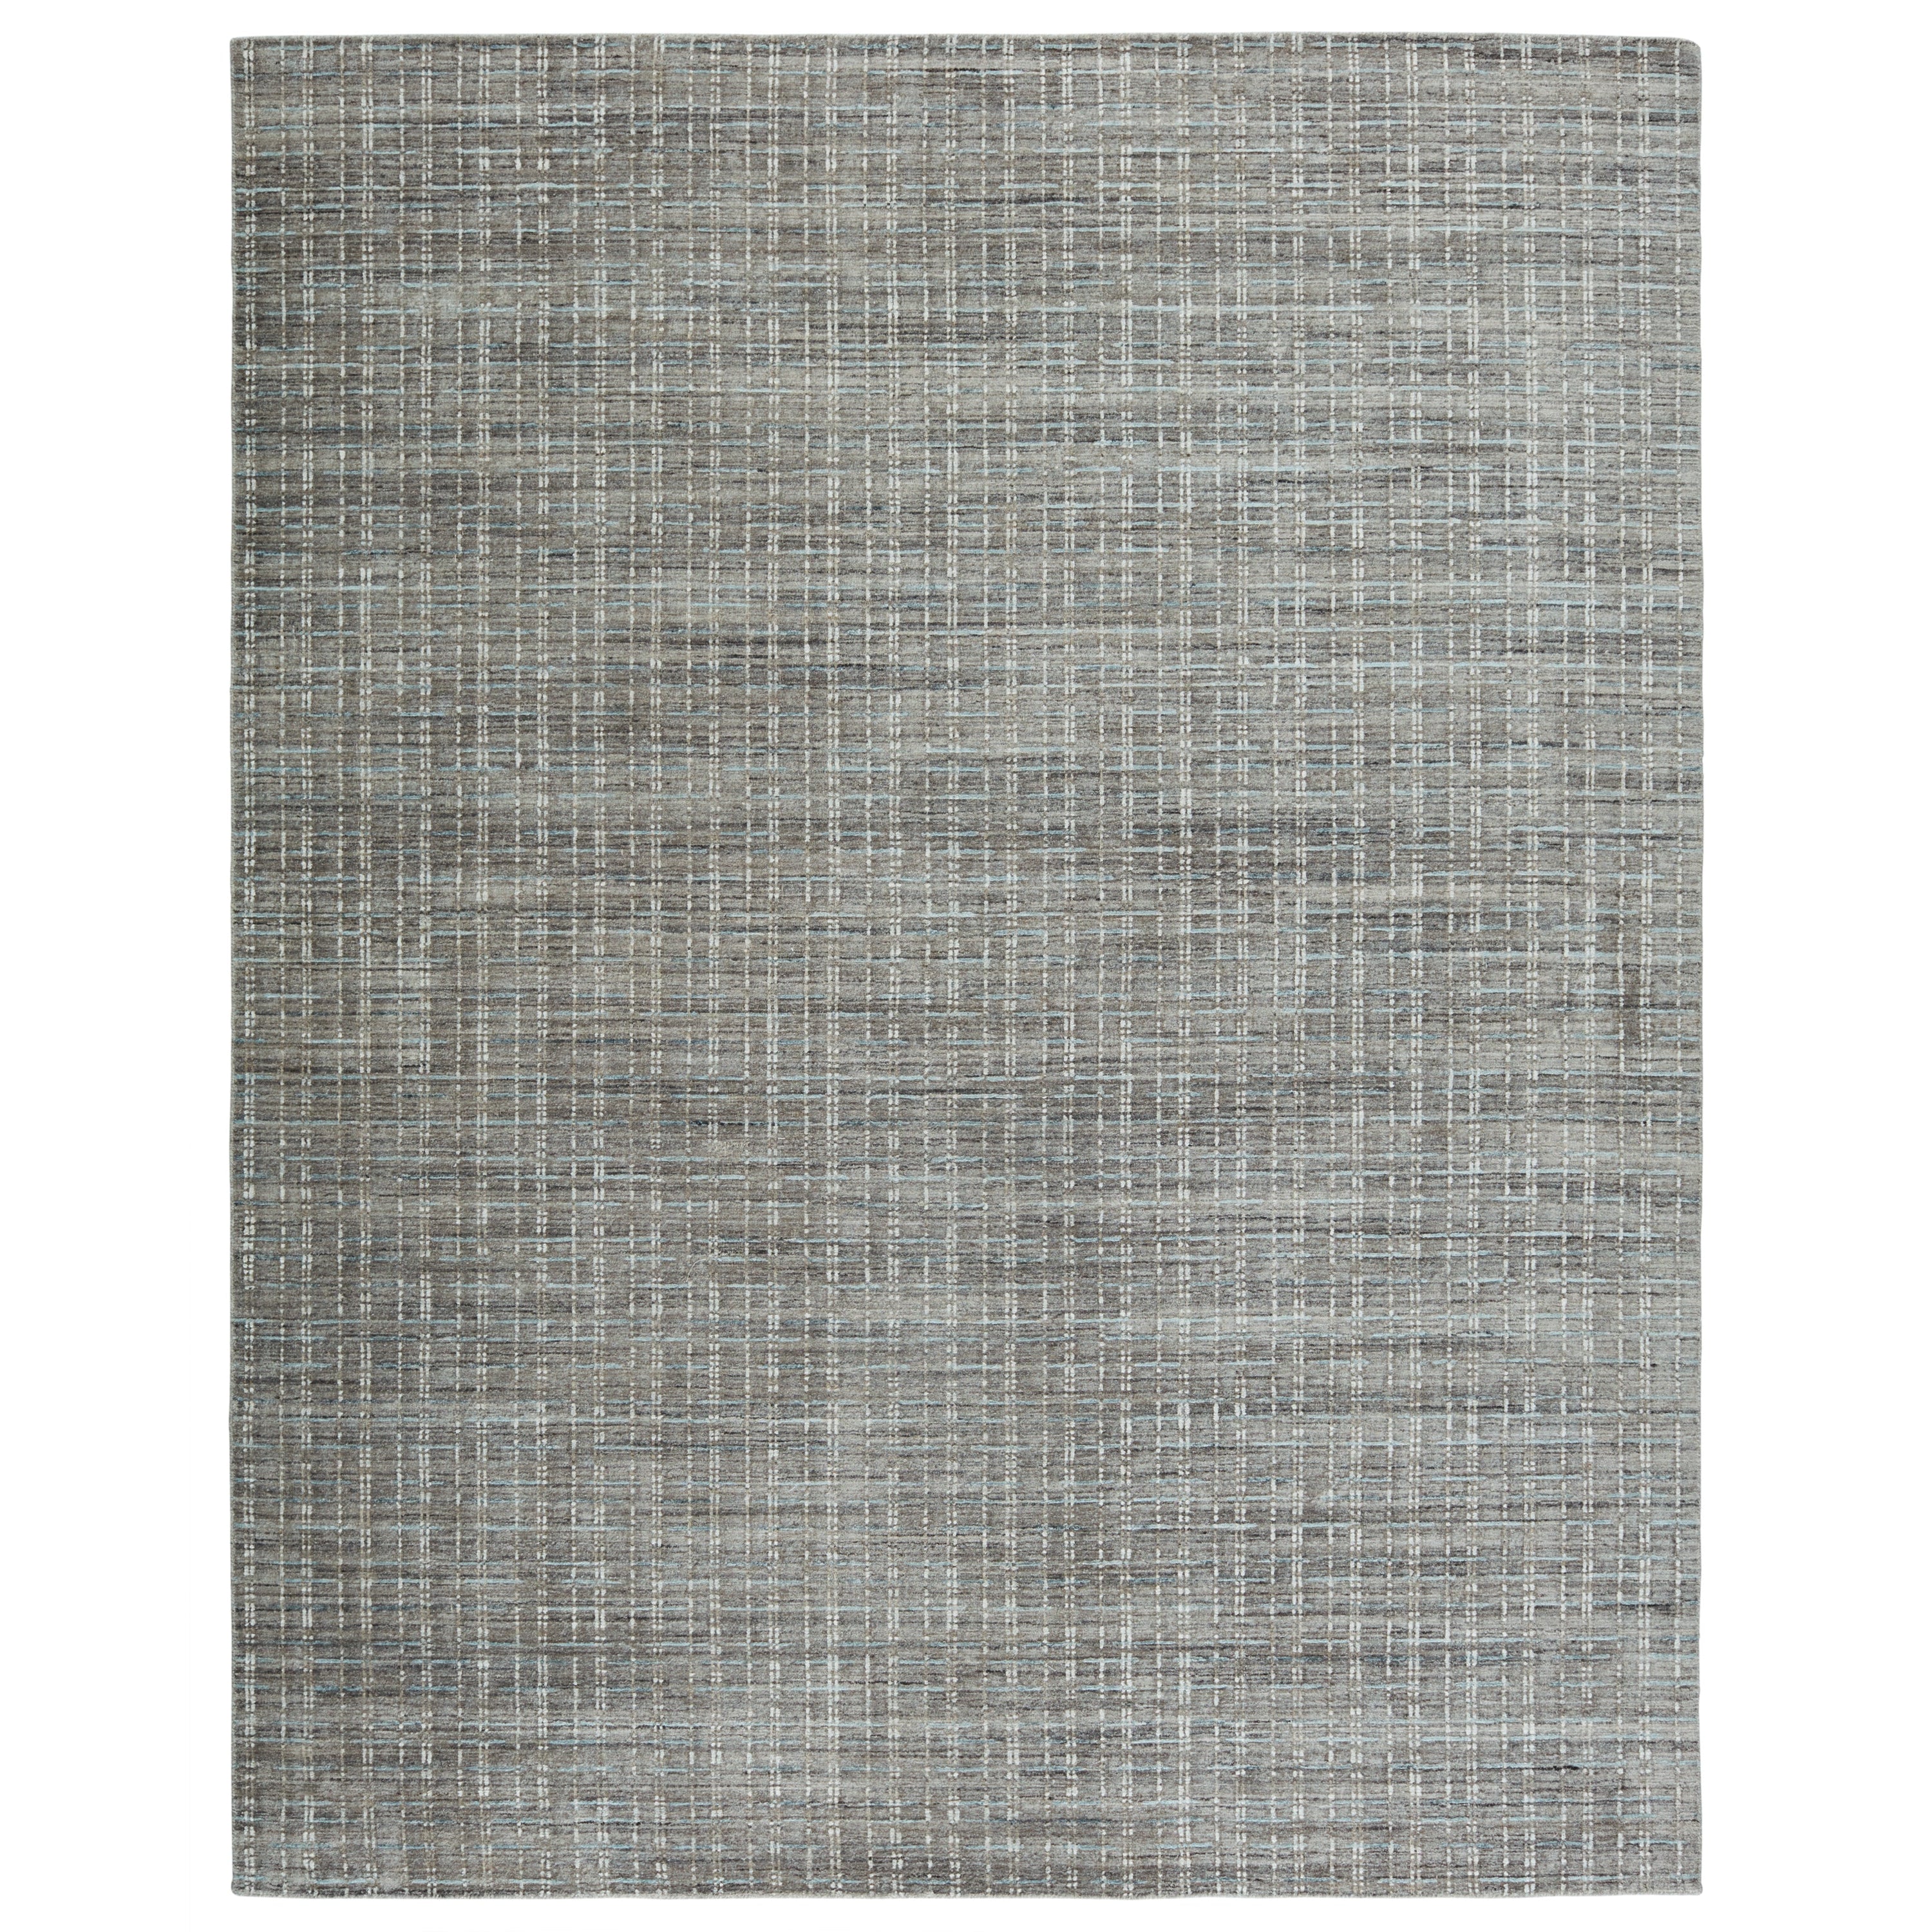 Chaudhary Living Gray Reversible Felt Pad for a 3' x 5' Rectangular Area  Throw Rug